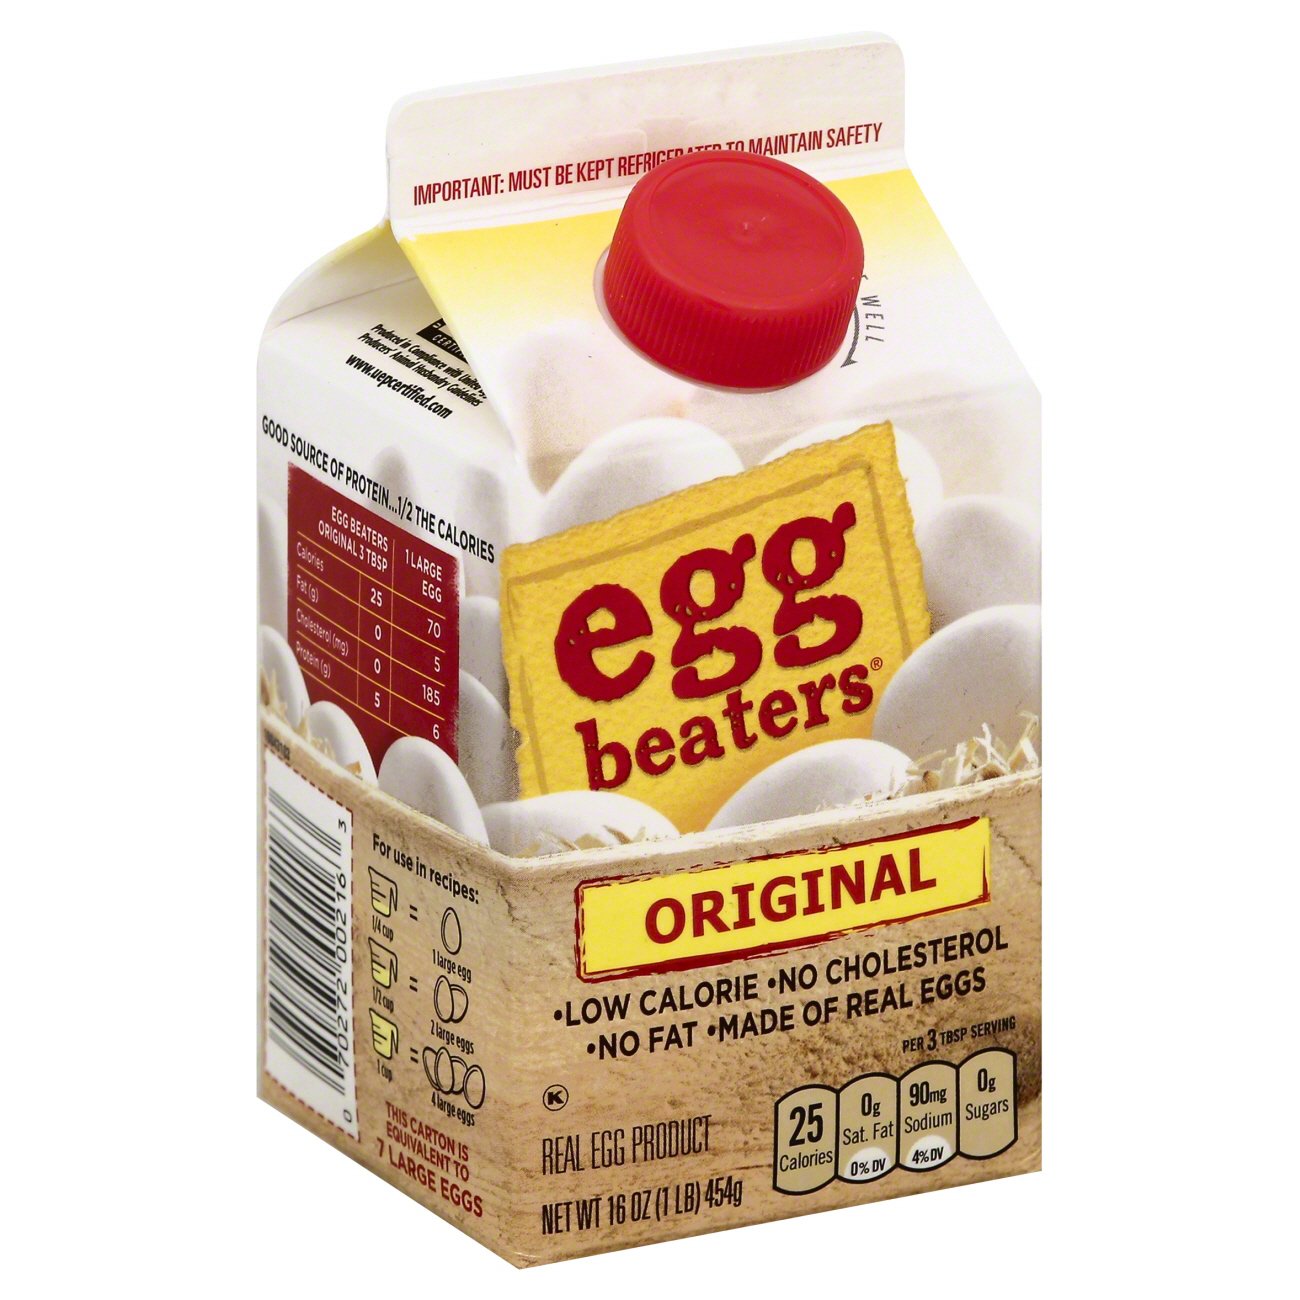 Egg Beaters Original Real Egg Product - Shop Eggs & Egg Substitutes at H-E-B